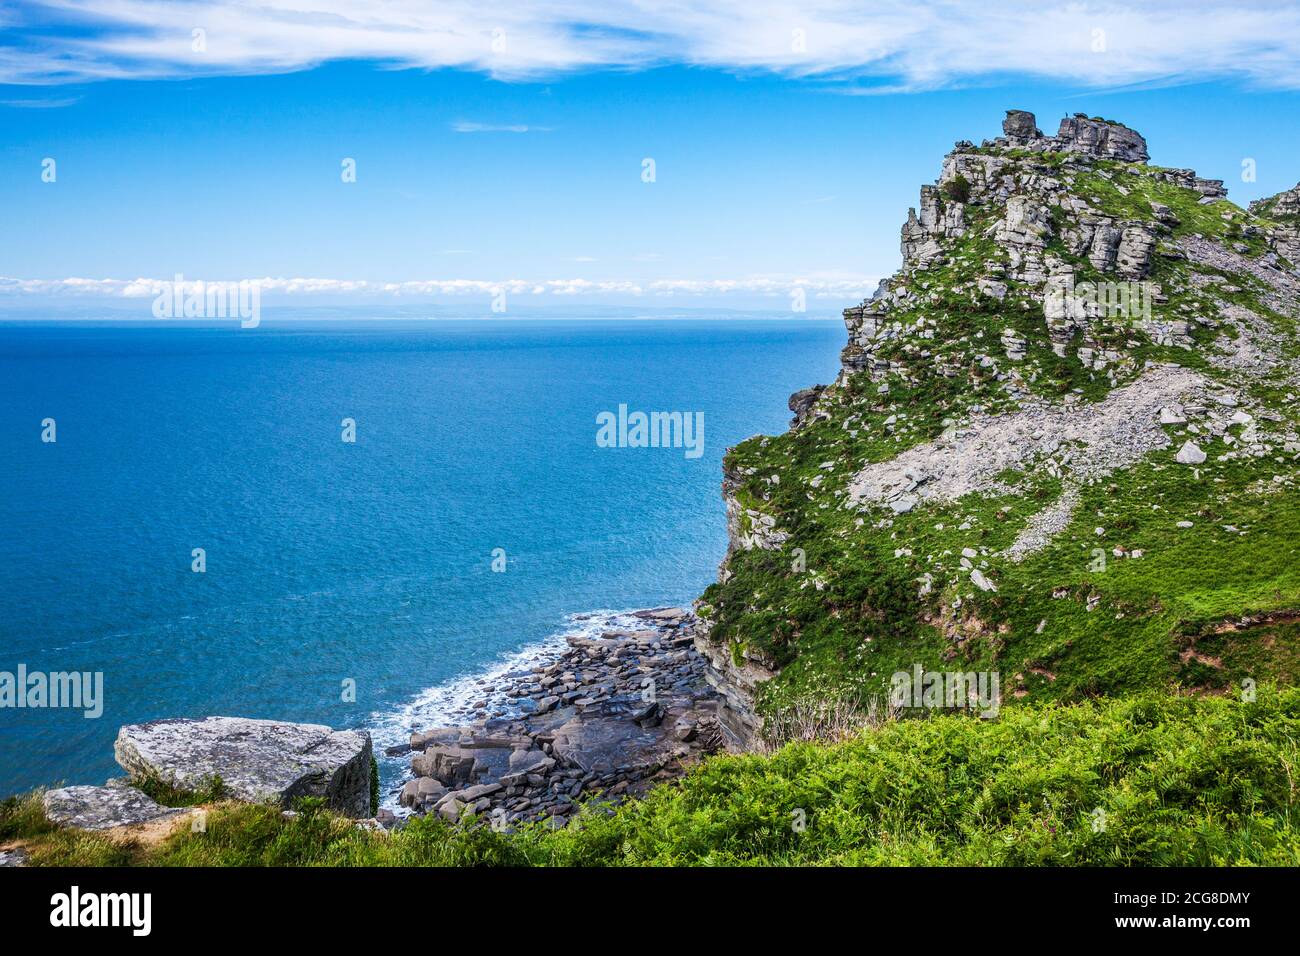 View the Bristol Channel near Lynton, Devon, from the South West Coast Path known as the Valley of the Rocks. Stock Photo